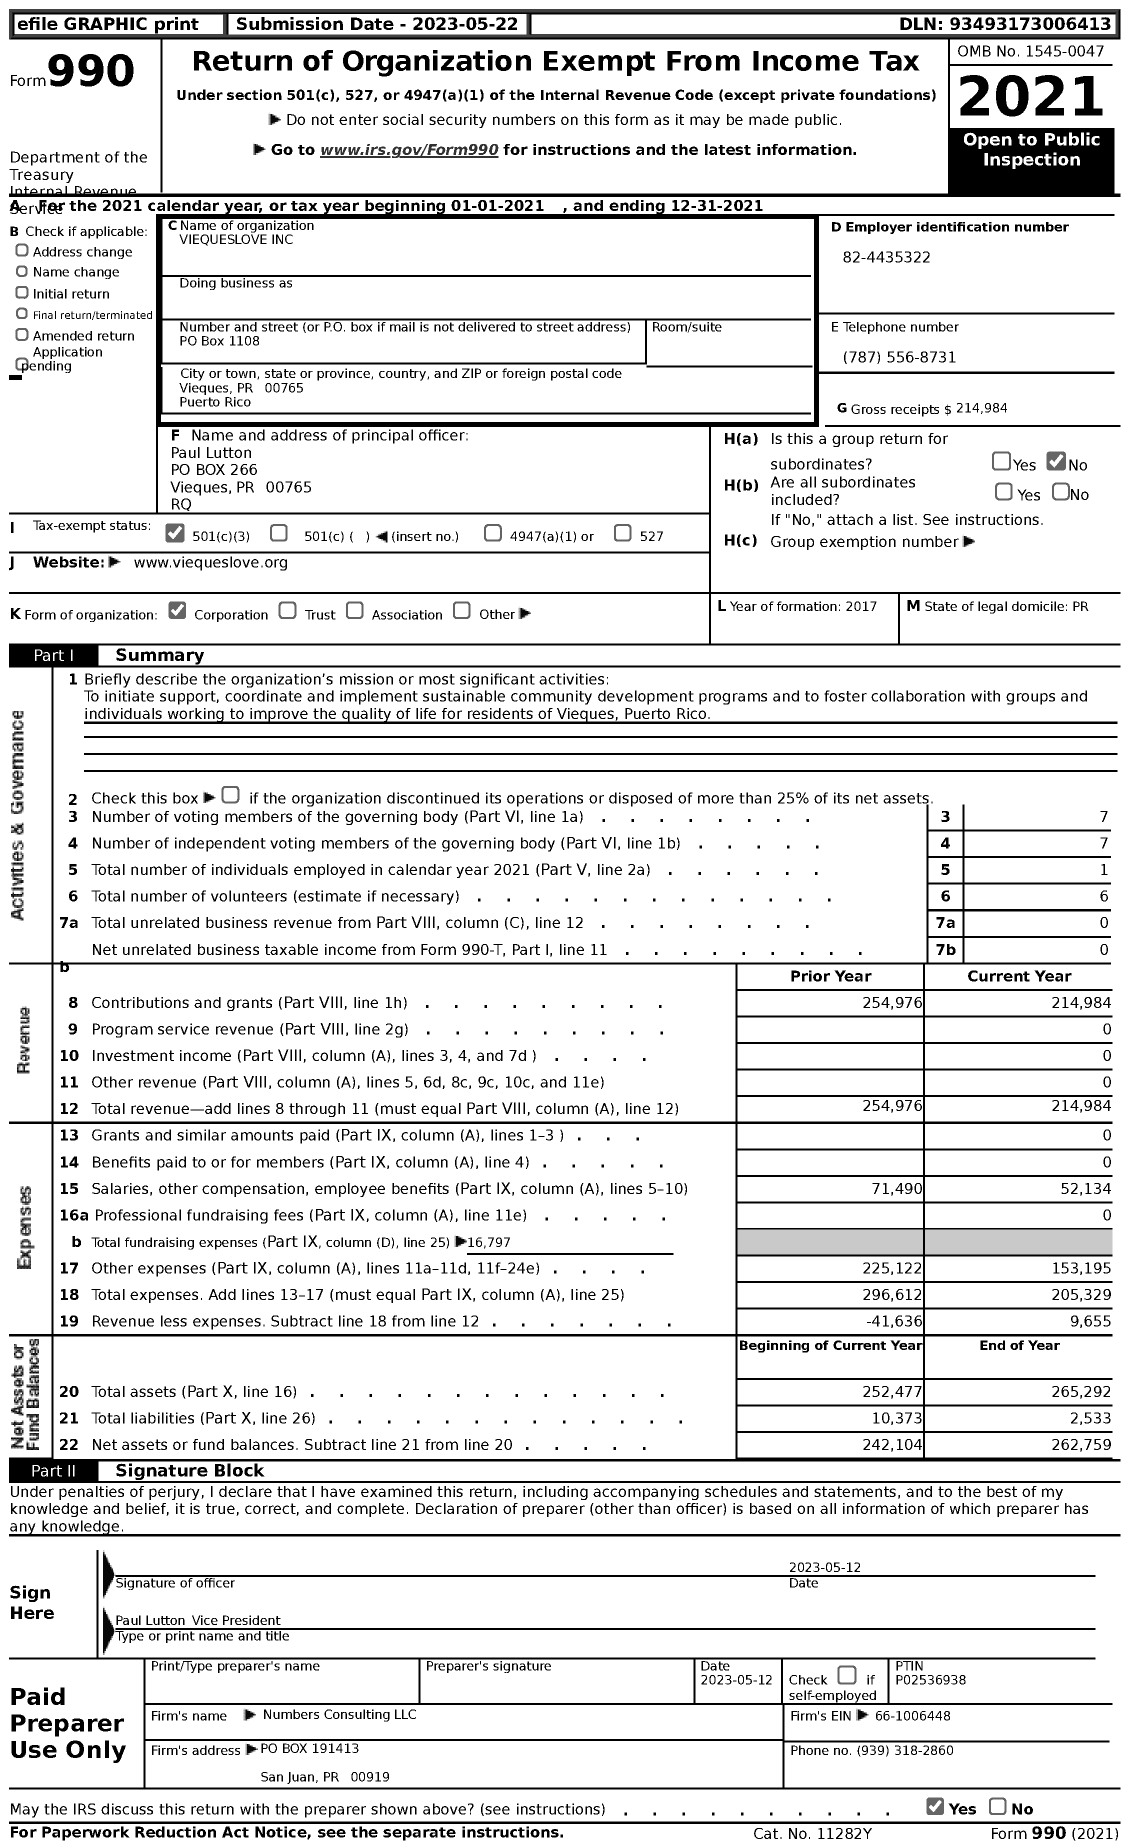 Image of first page of 2021 Form 990 for ViequesLove